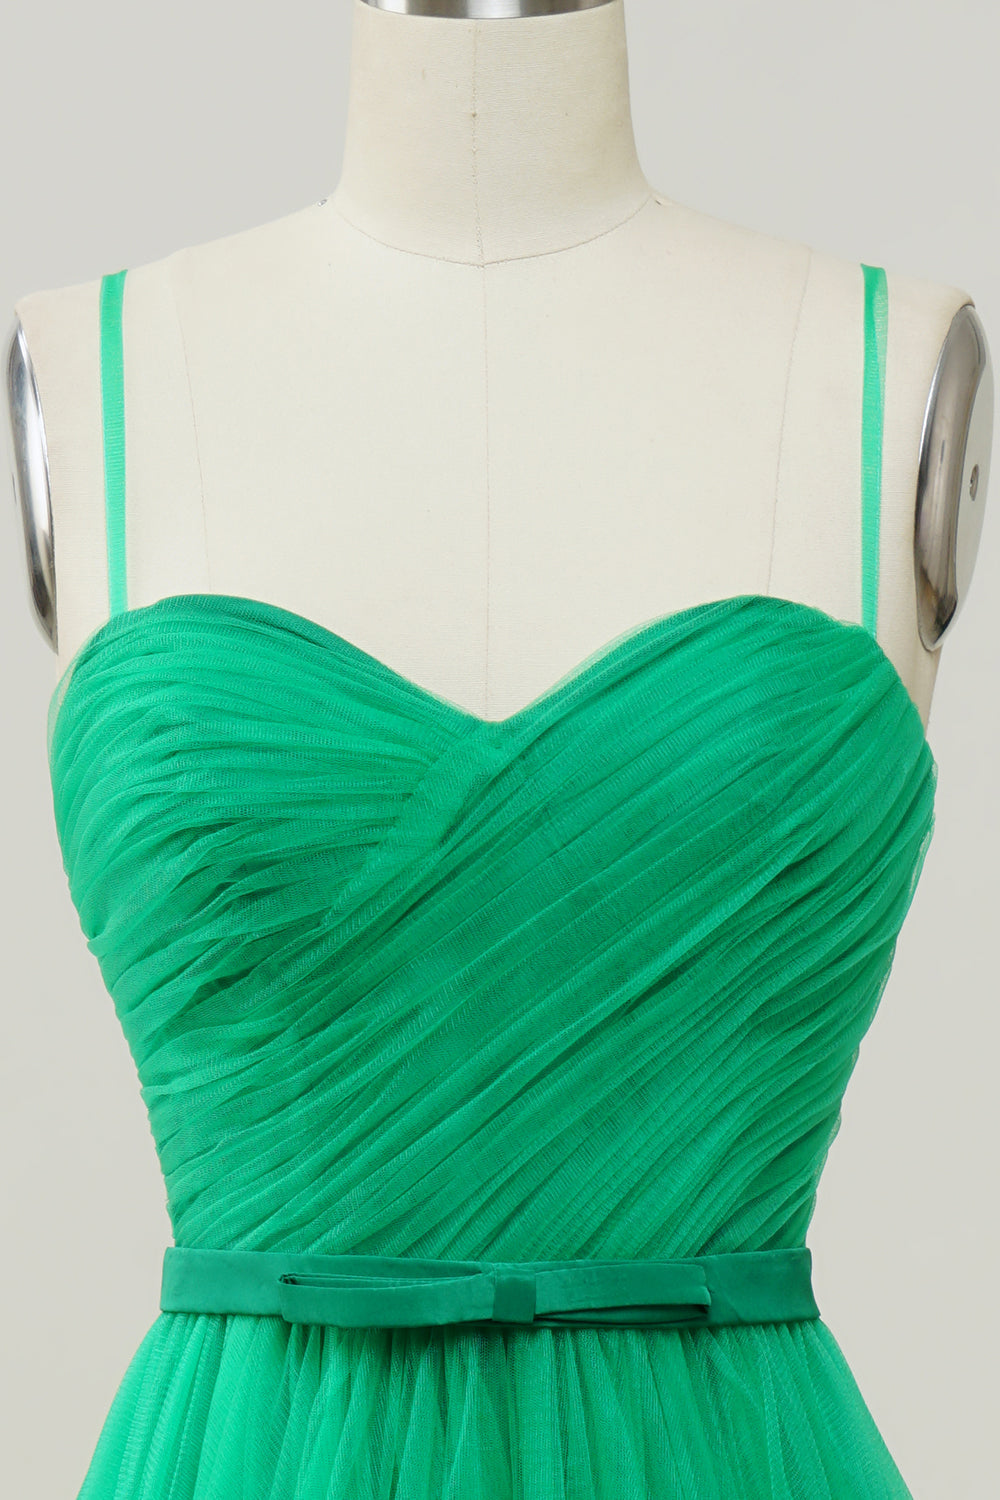 Green Tulle A-line Midi Prom Dress with Ruffles